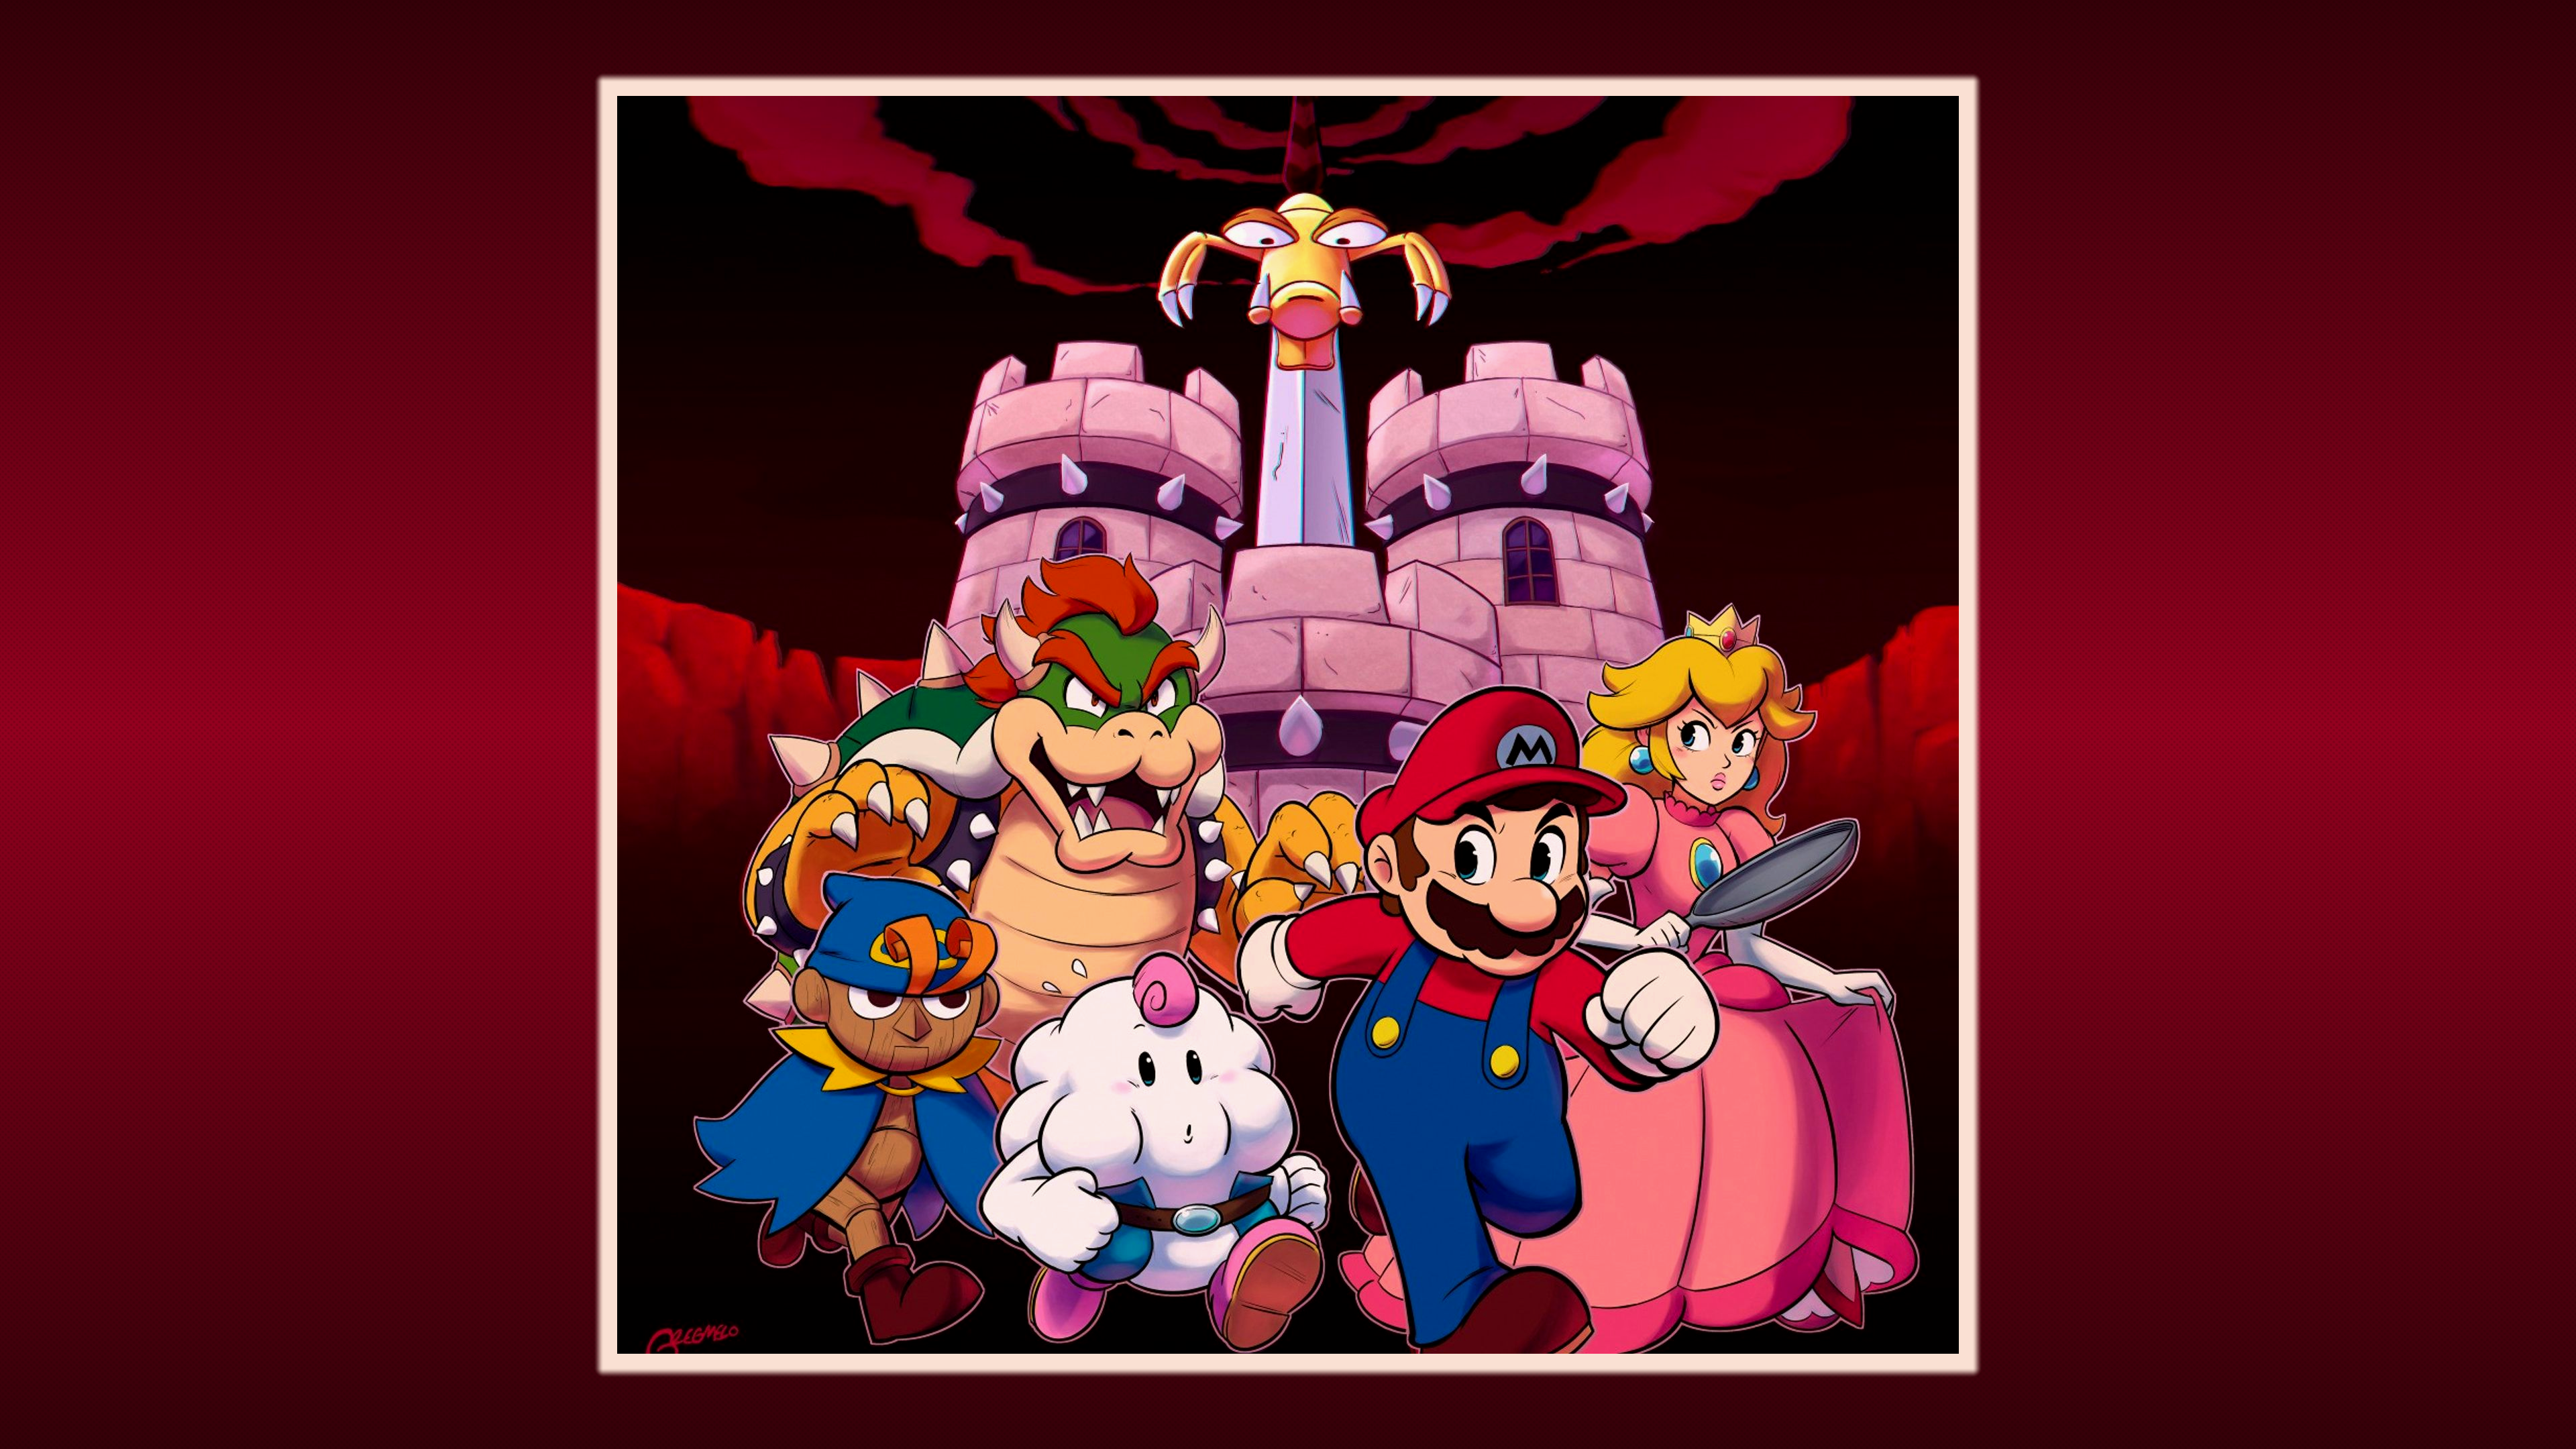 General 3840x2160 video game girls bangs super mario rpg Super Mario Mario Bros. Geno (Super Mario) Mallow (Super Mario) Pan castle Bowser Koopa white gloves dress turtle cape blue clothing suspenders red shirt hat fangs spikes redhead blonde moustache claws jewel jewelry crown simple background pink dress video games spike  LetItMelo video game characters